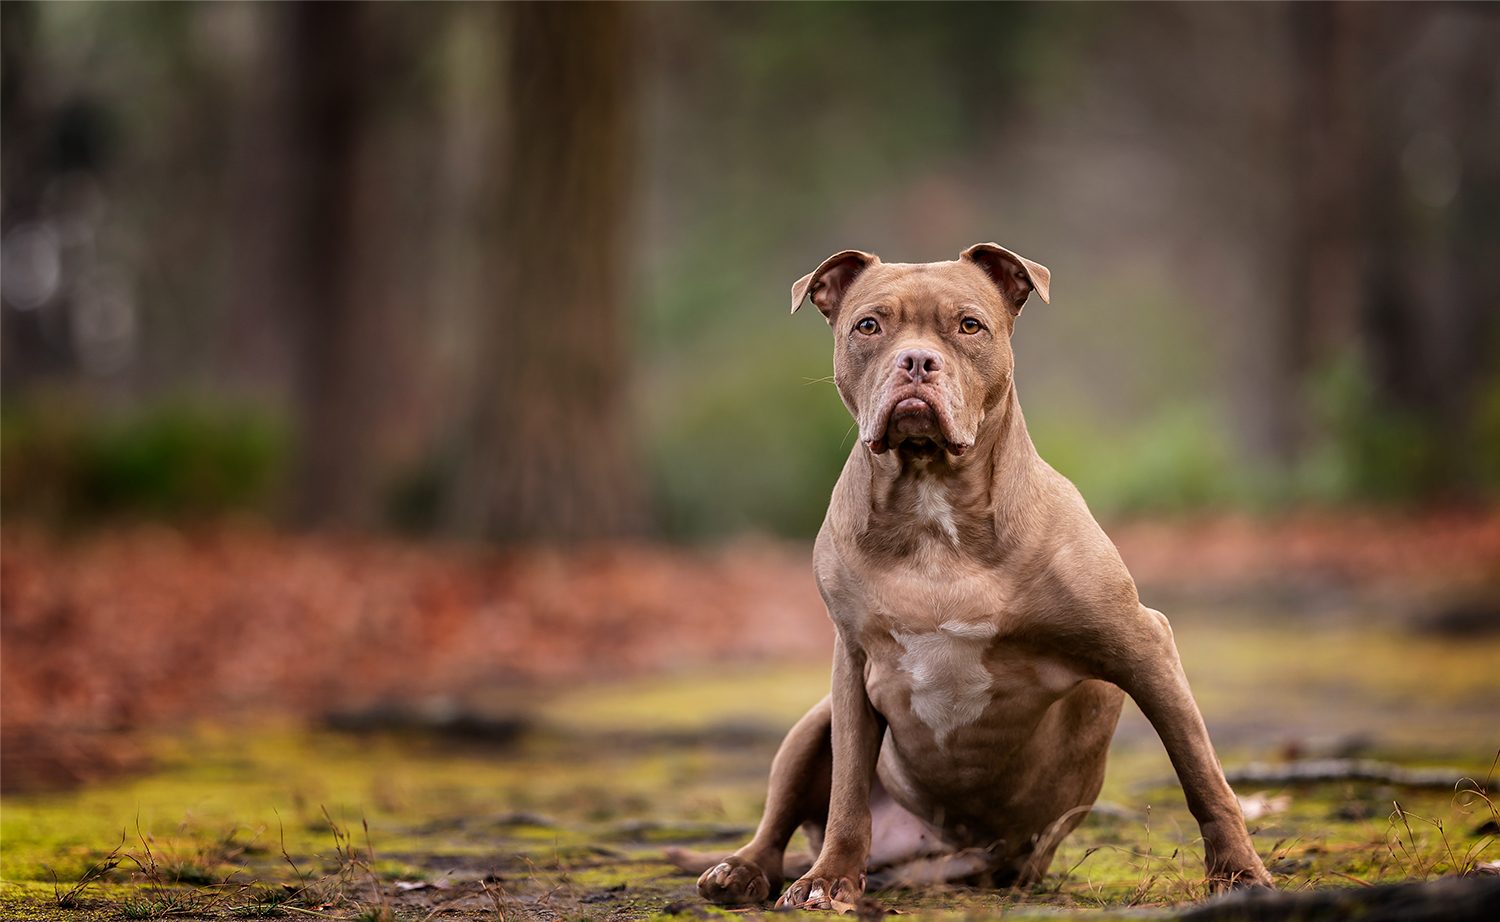 Bella, the 3-legged pit bull is a cancer survivor and therapy dog